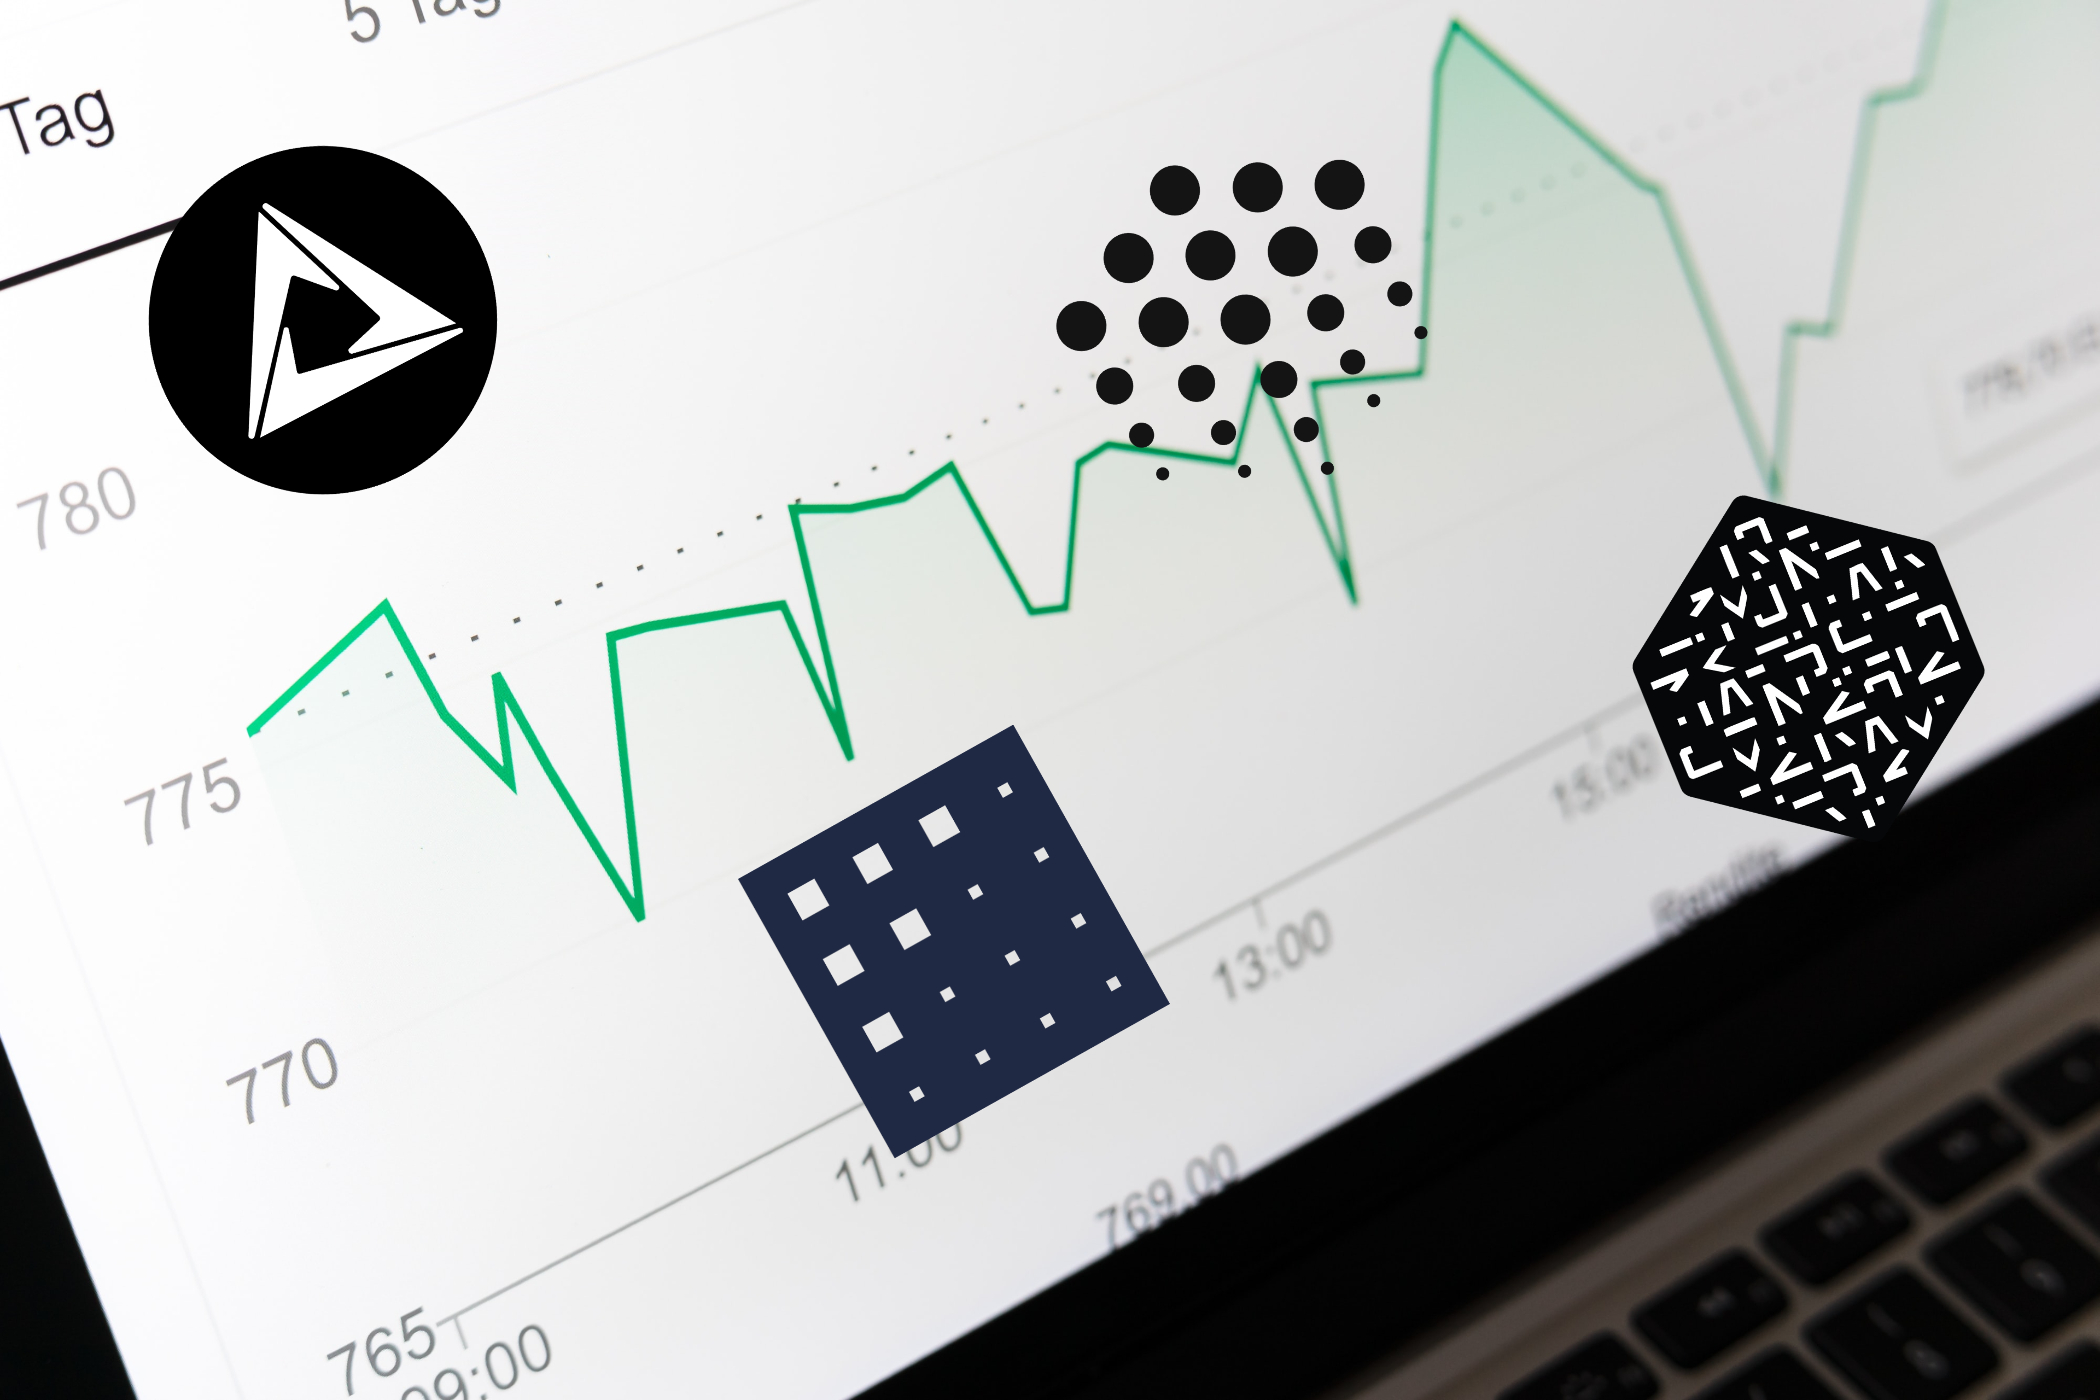 AI crypto tokens are flashing bullish signals by way of technical patterns